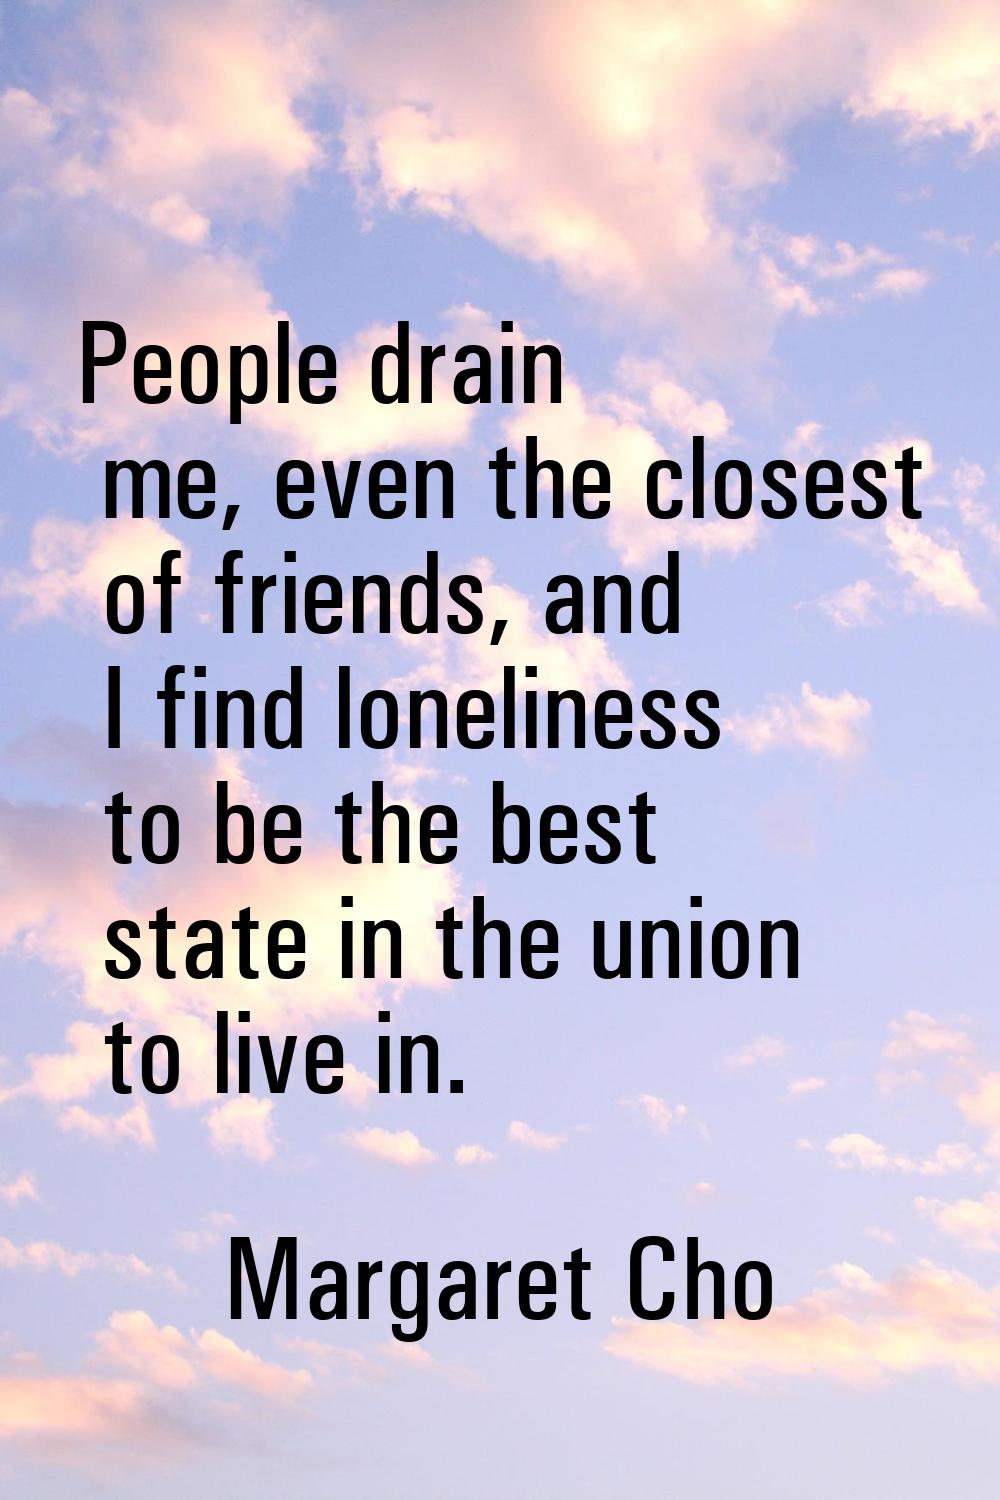 People drain me, even the closest of friends, and I find loneliness to be the best state in the uni